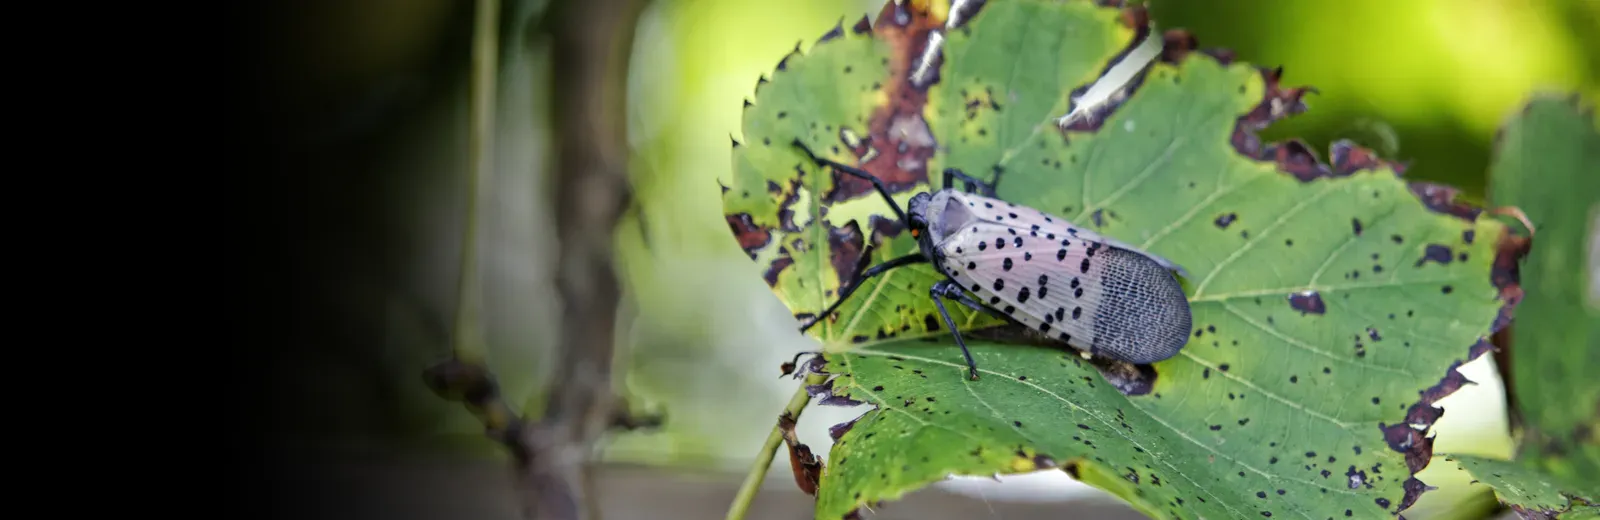 spotted lantern fly